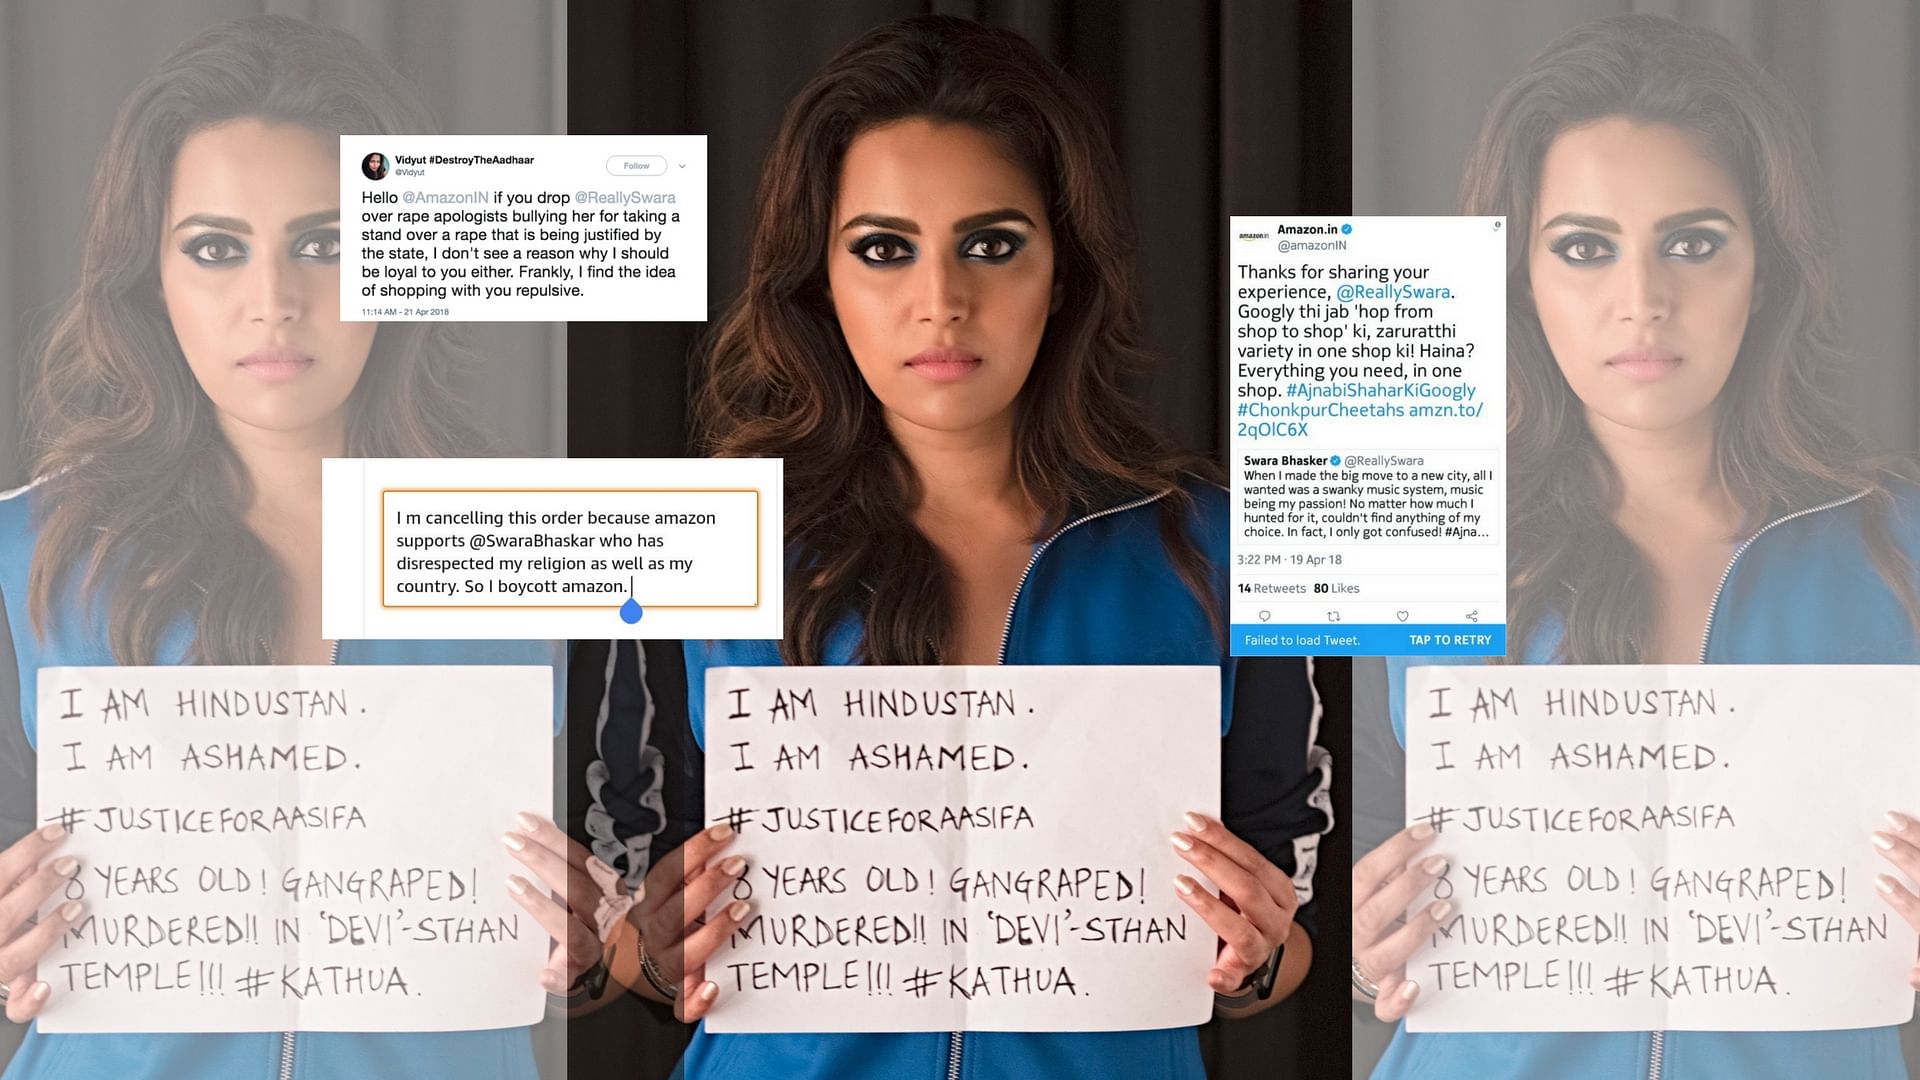 A Twitter war erupted over Amazon India’s association with Swara Bhasker.